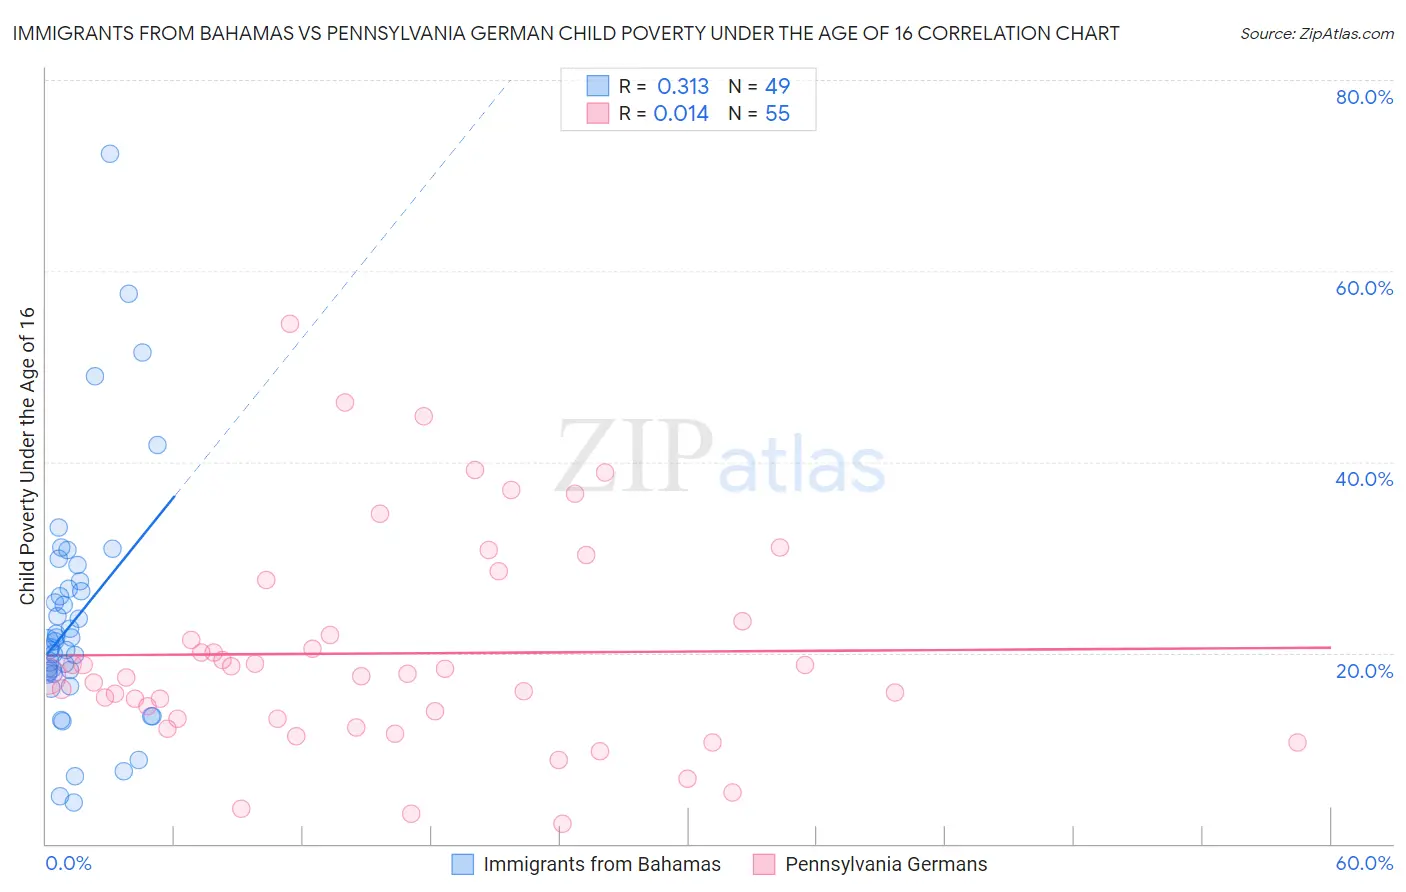 Immigrants from Bahamas vs Pennsylvania German Child Poverty Under the Age of 16